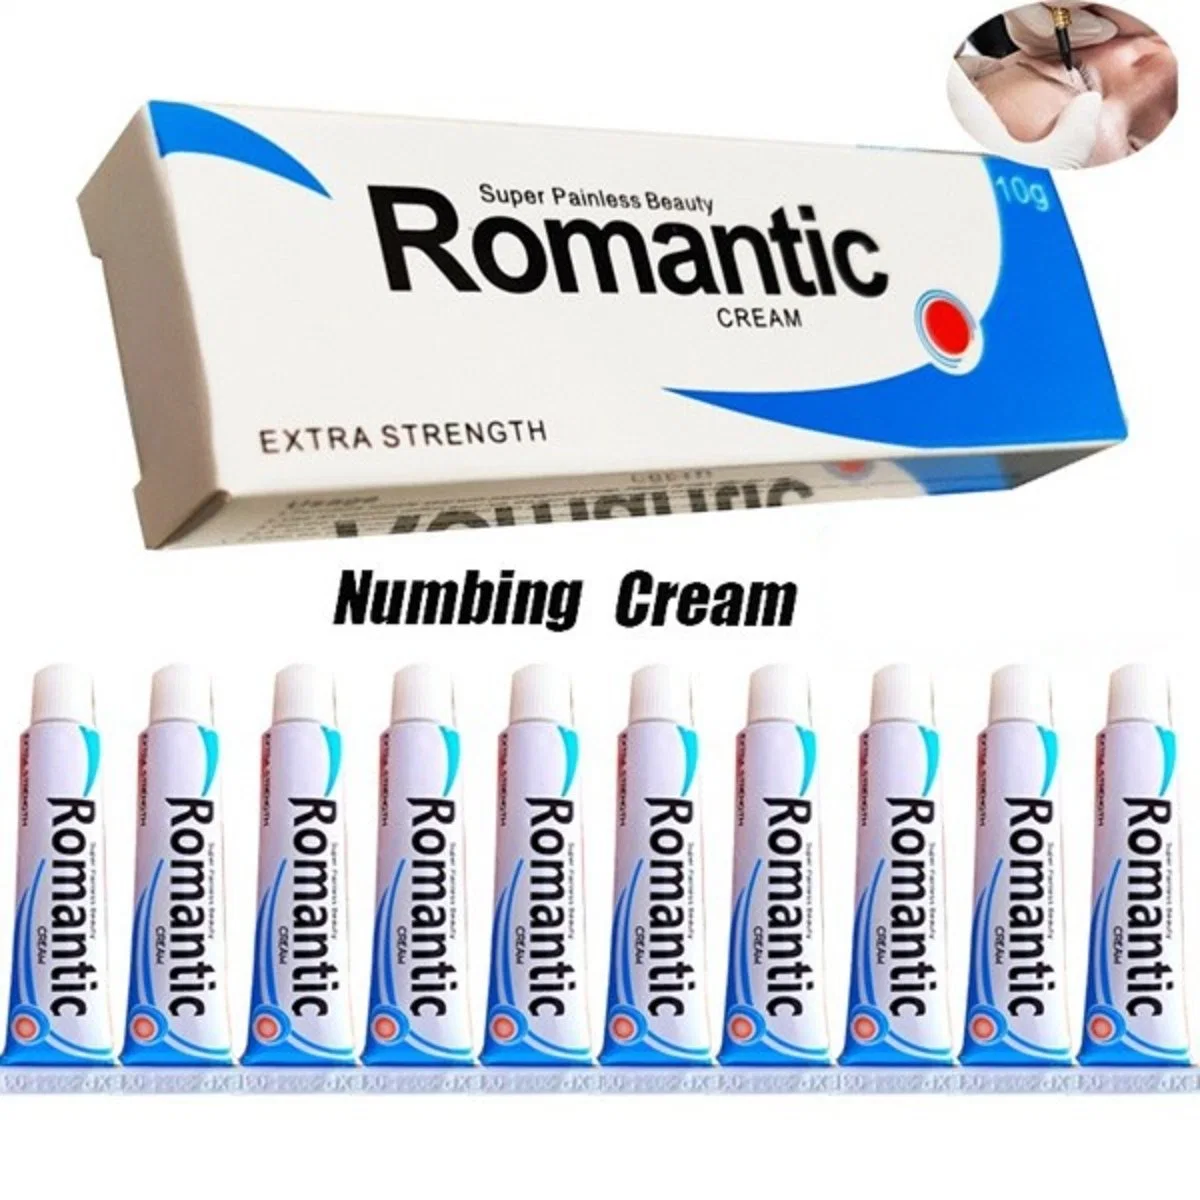 Tattoo Romantic Super Anesthetic Numbing Cream Before Painless Permanent Makeup Supply